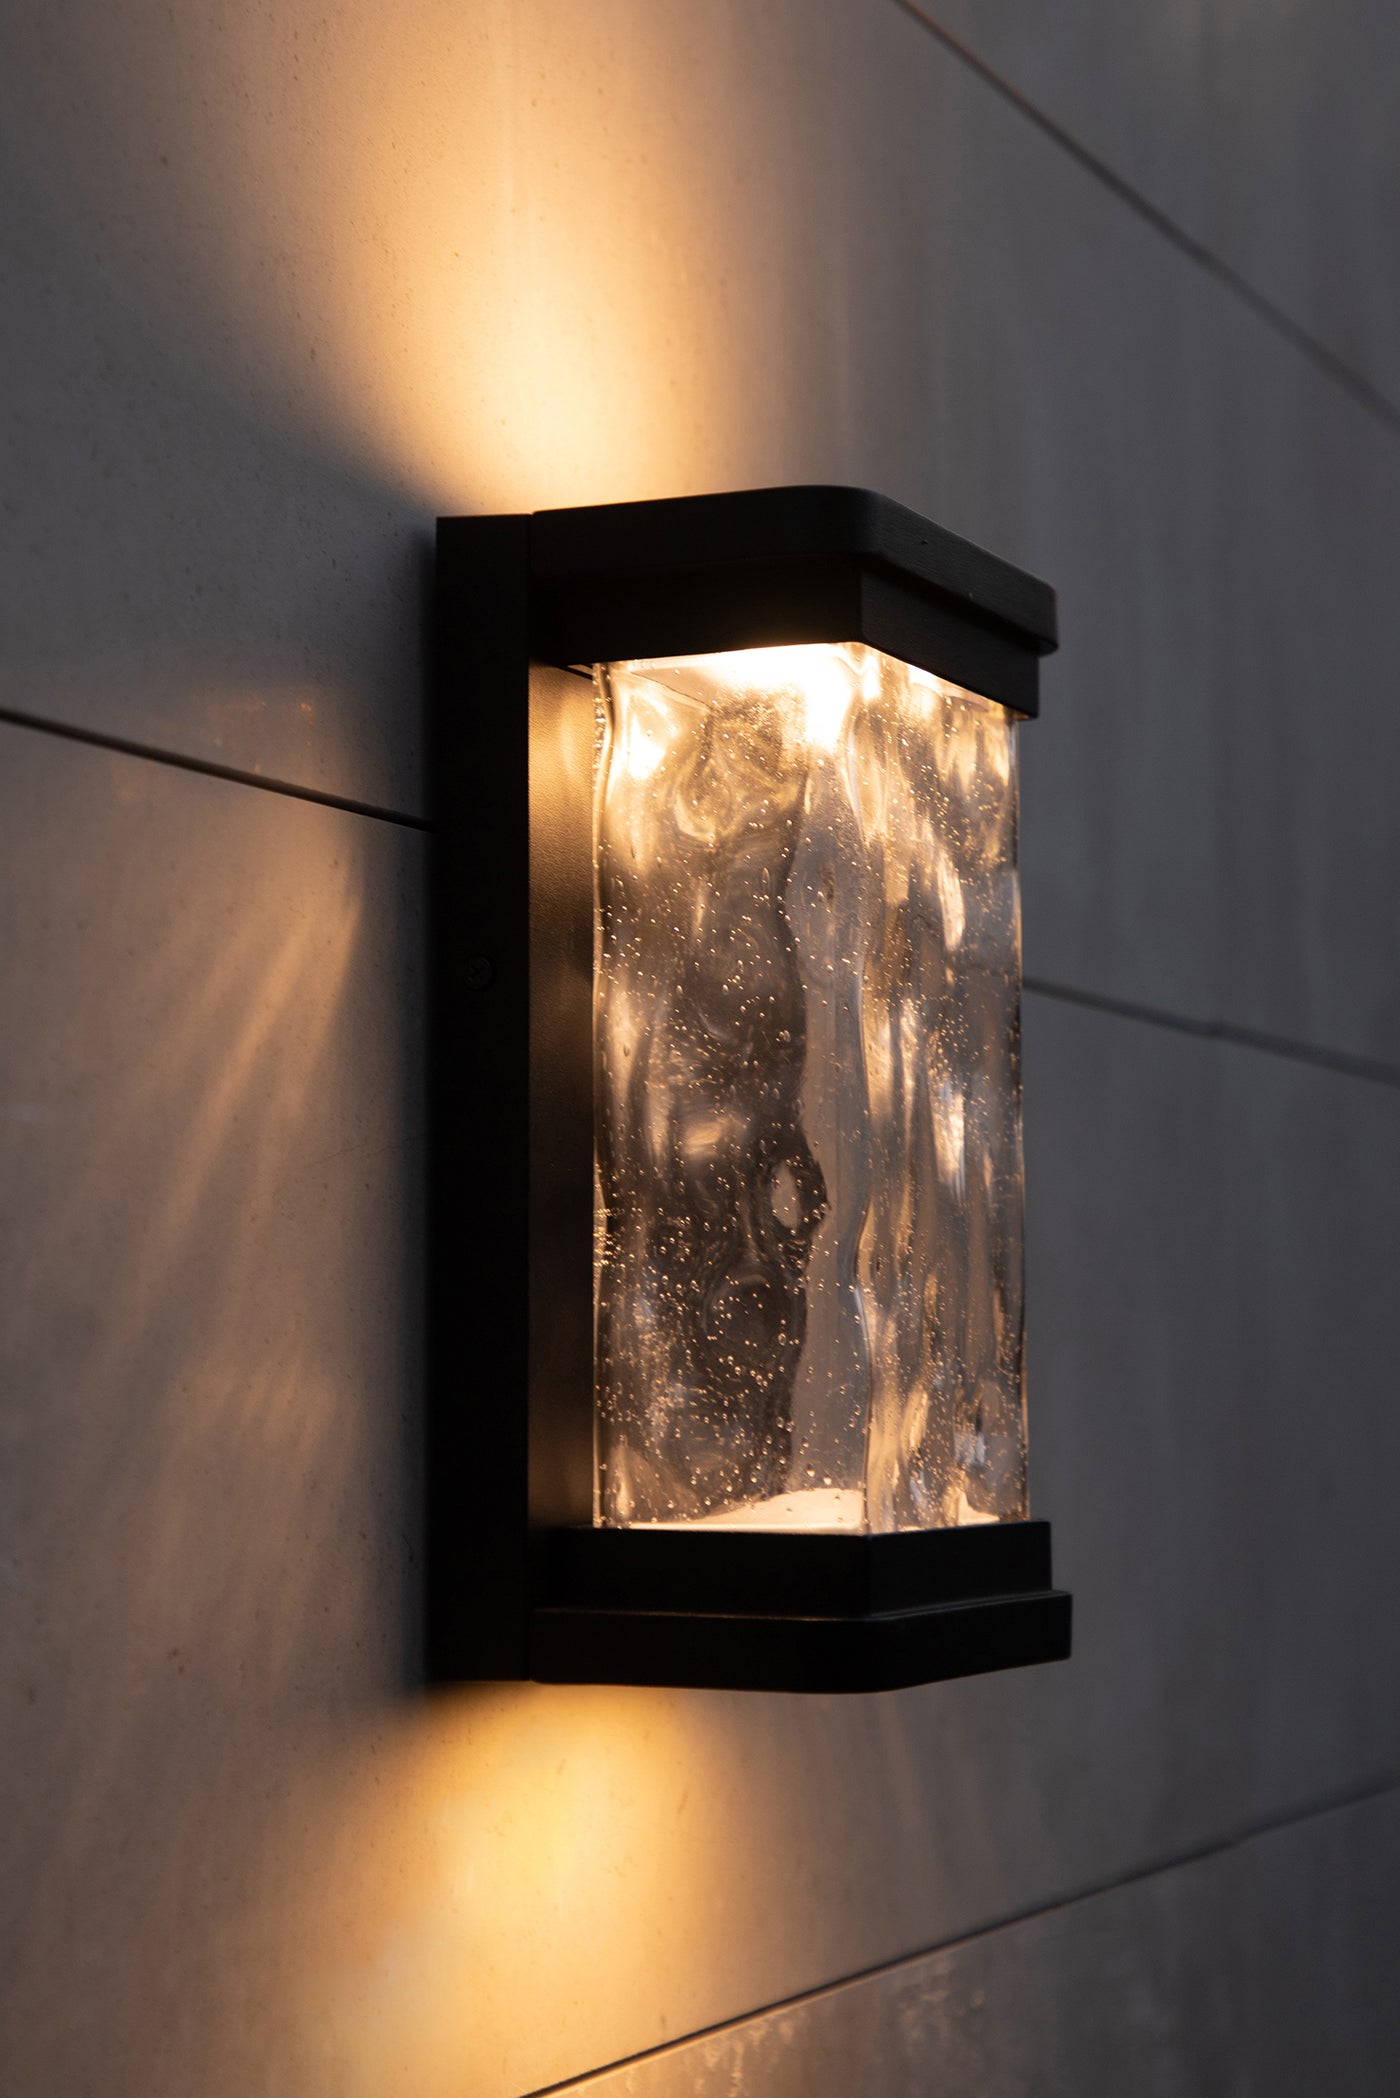 LUTEC-STARRY LED Outdoor Wall Sconce With Seeded Glass Surround, Dusk To Dawn, 15W,1000LM, 3000K